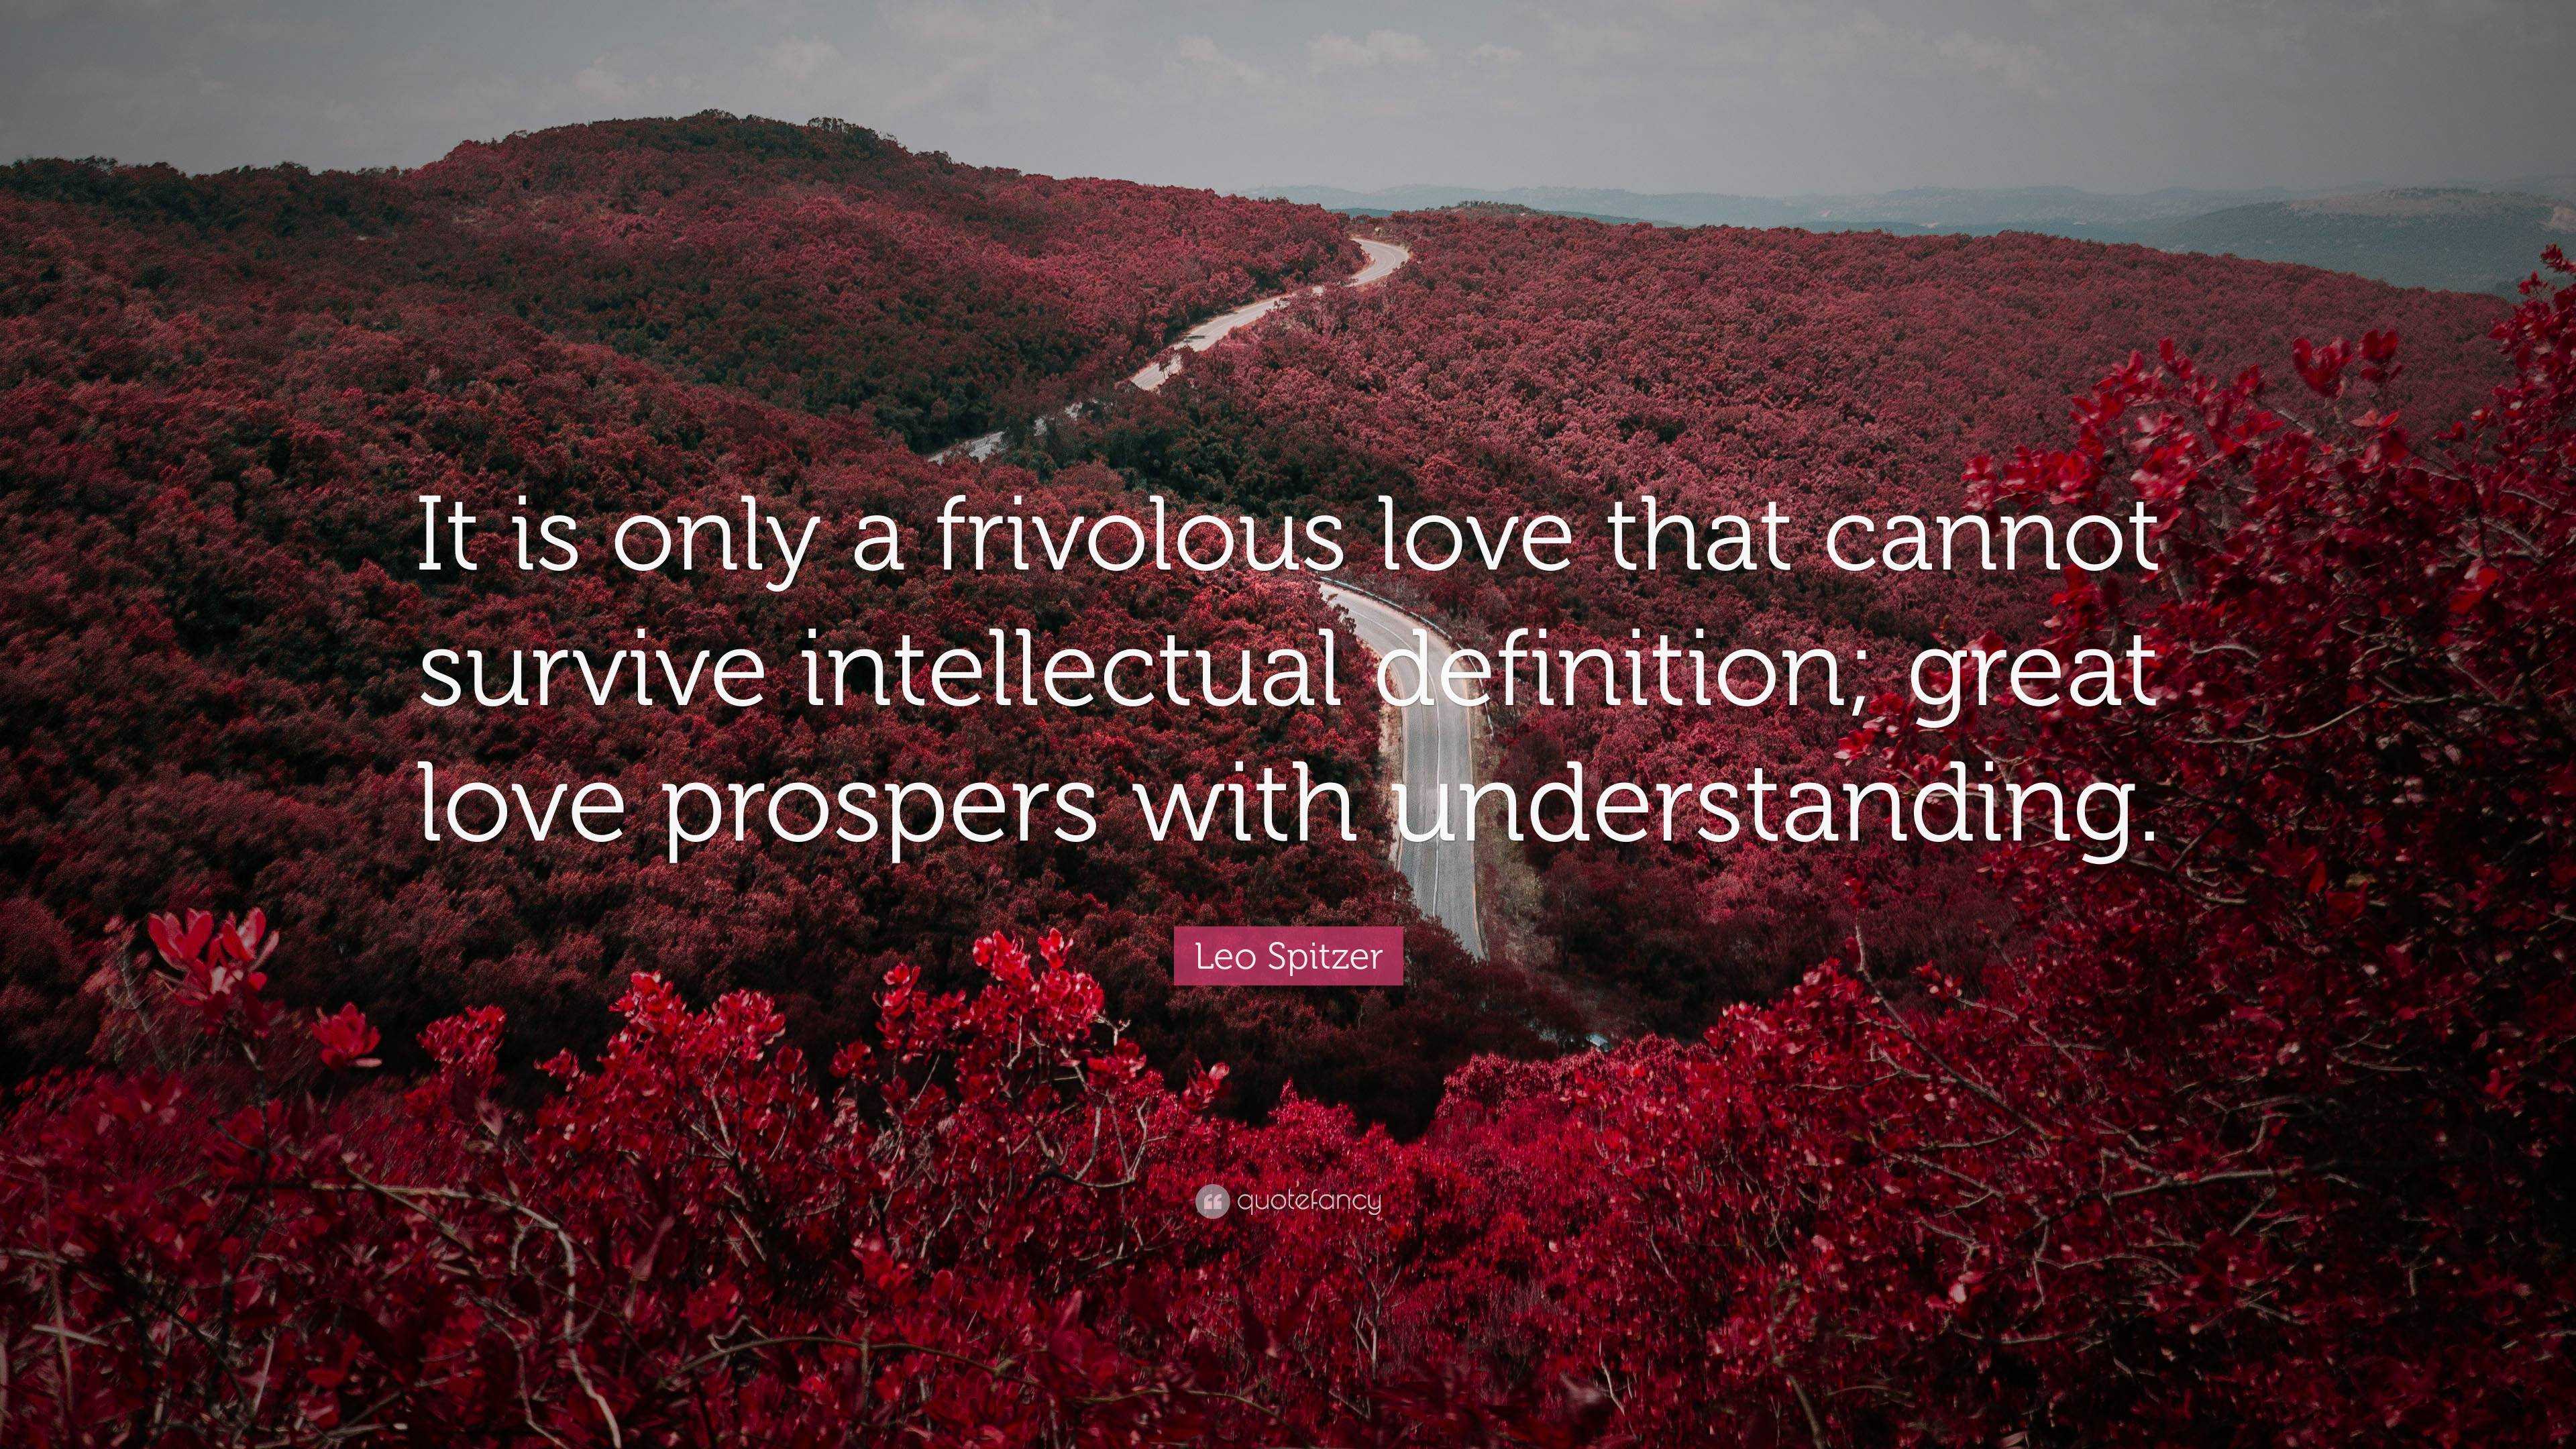 Leo Spitzer Quote: “It is only a frivolous love that cannot survive ...